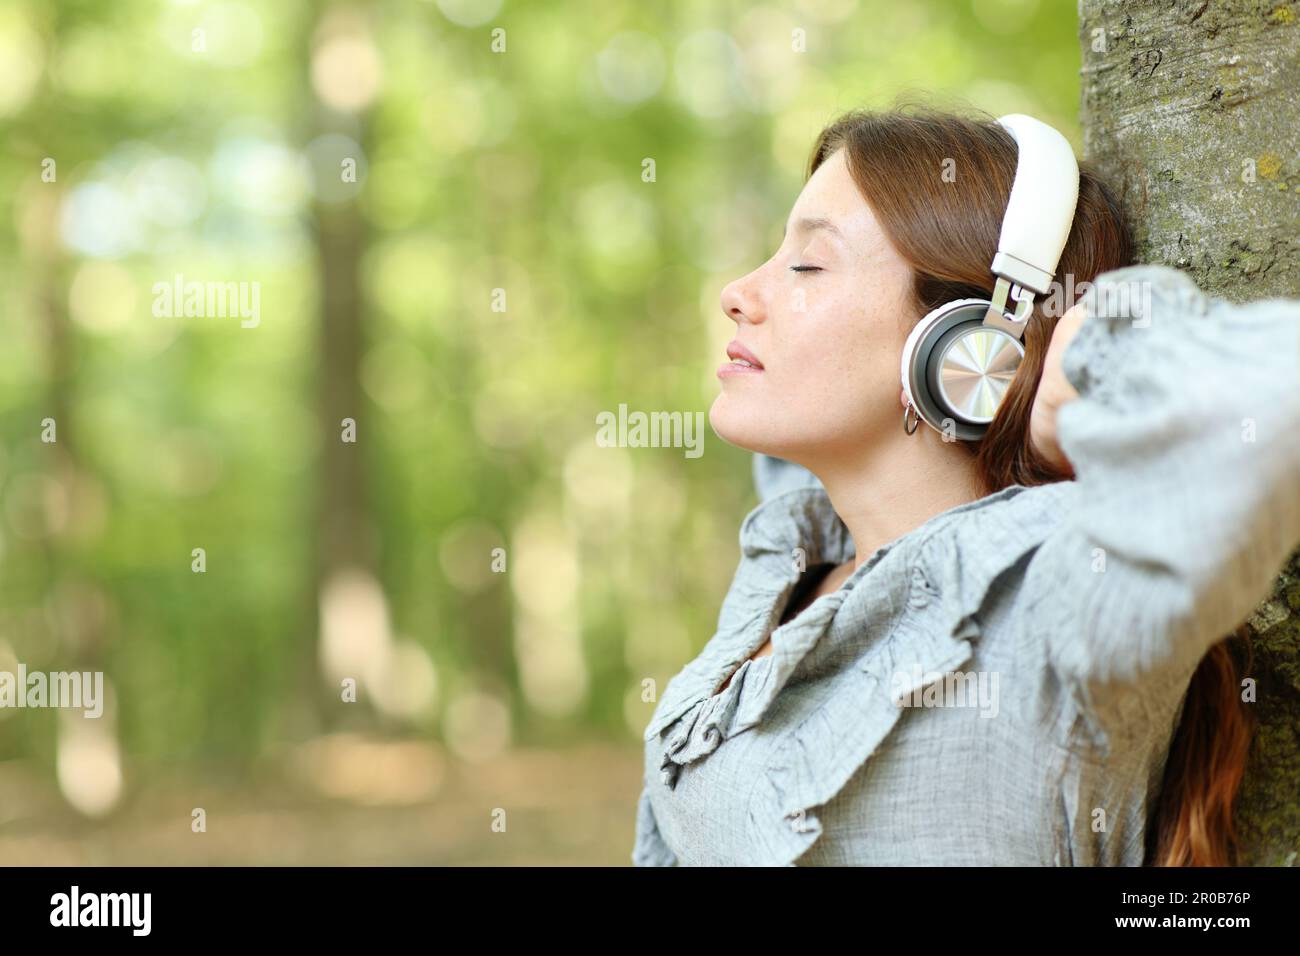 Side view portrait of a happy woman relaxing listening music in a forest Stock Photo